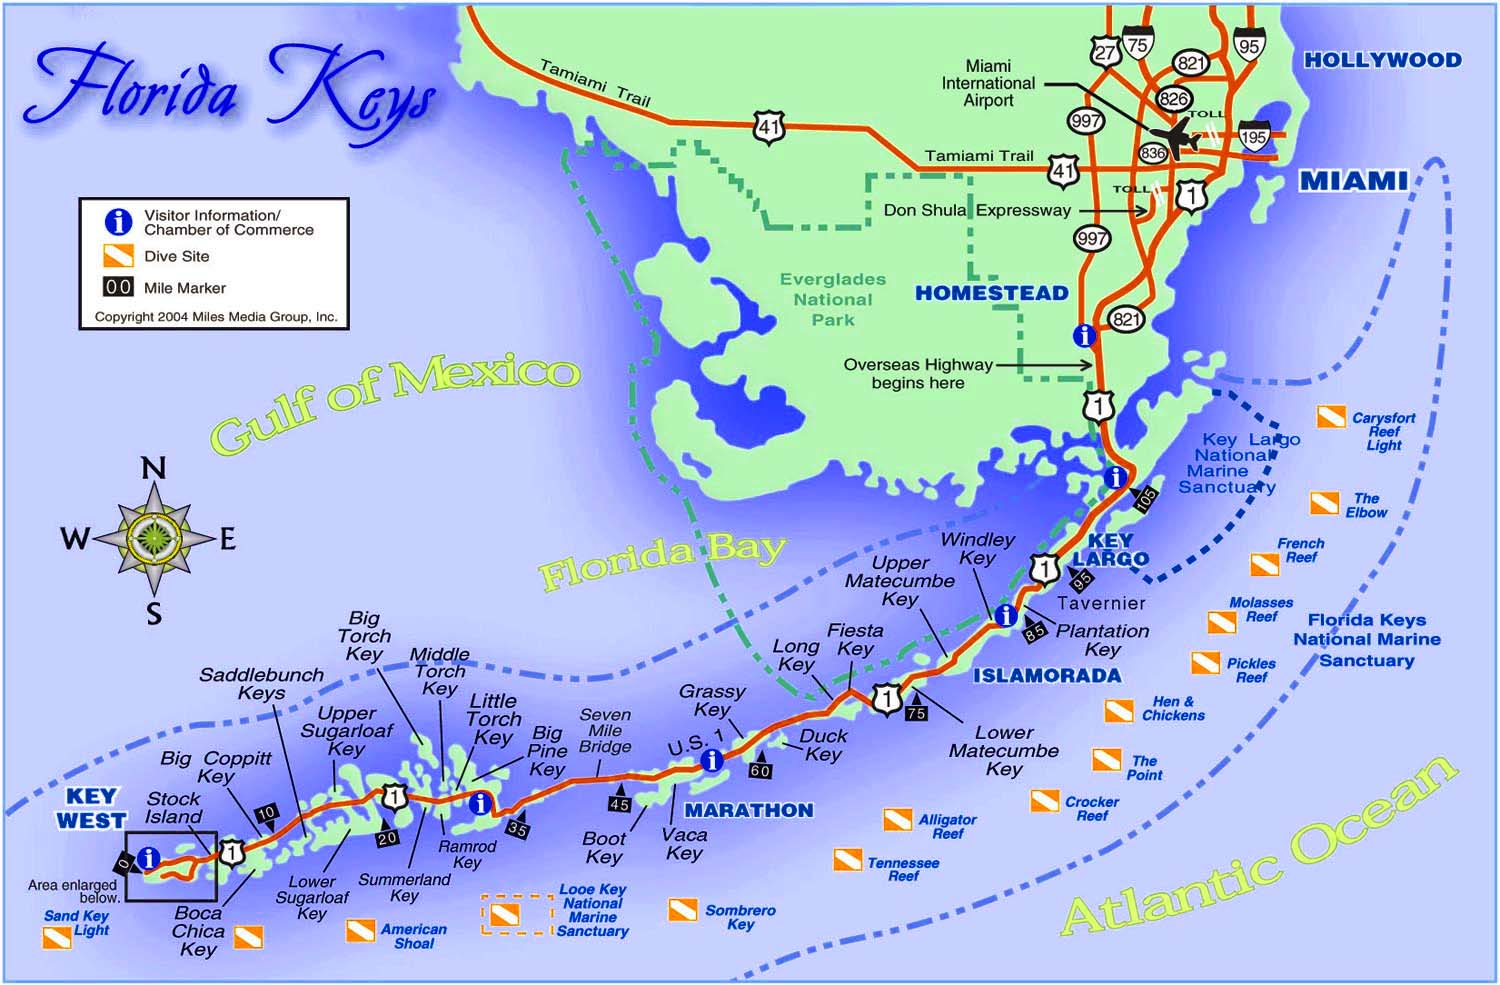 Best Florida Keys Beaches Map And Information - Florida Keys - Key West Florida Map Of Hotels